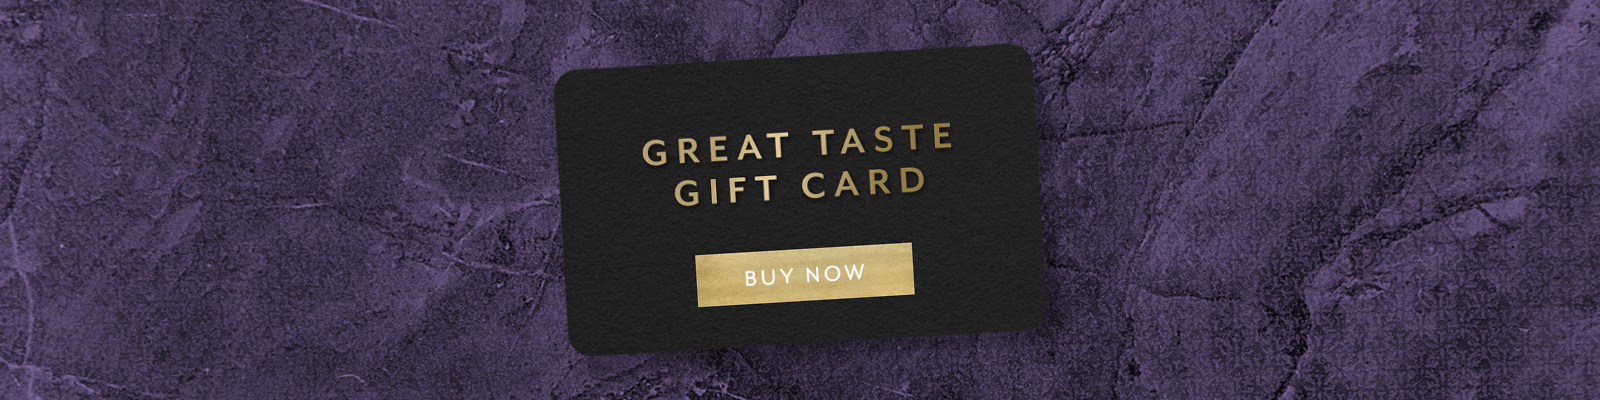 The Chilworth Arms Gift Card